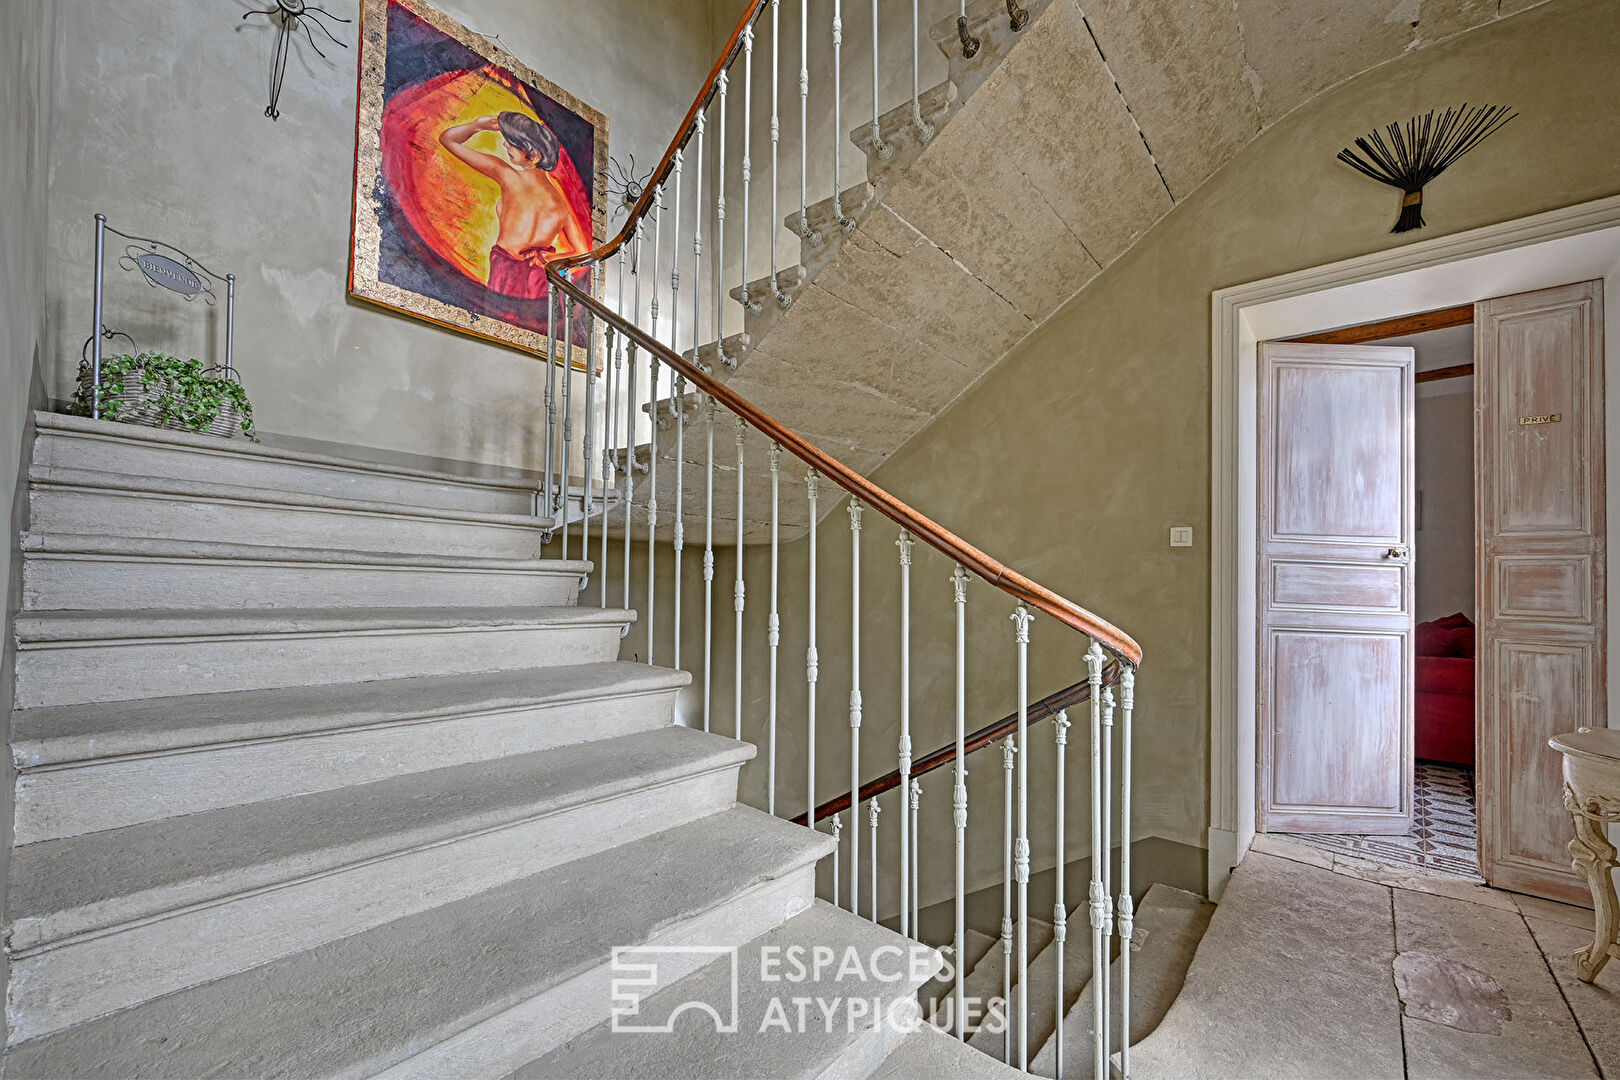 Exceptional estate with bastide, outbuildings and century-old park